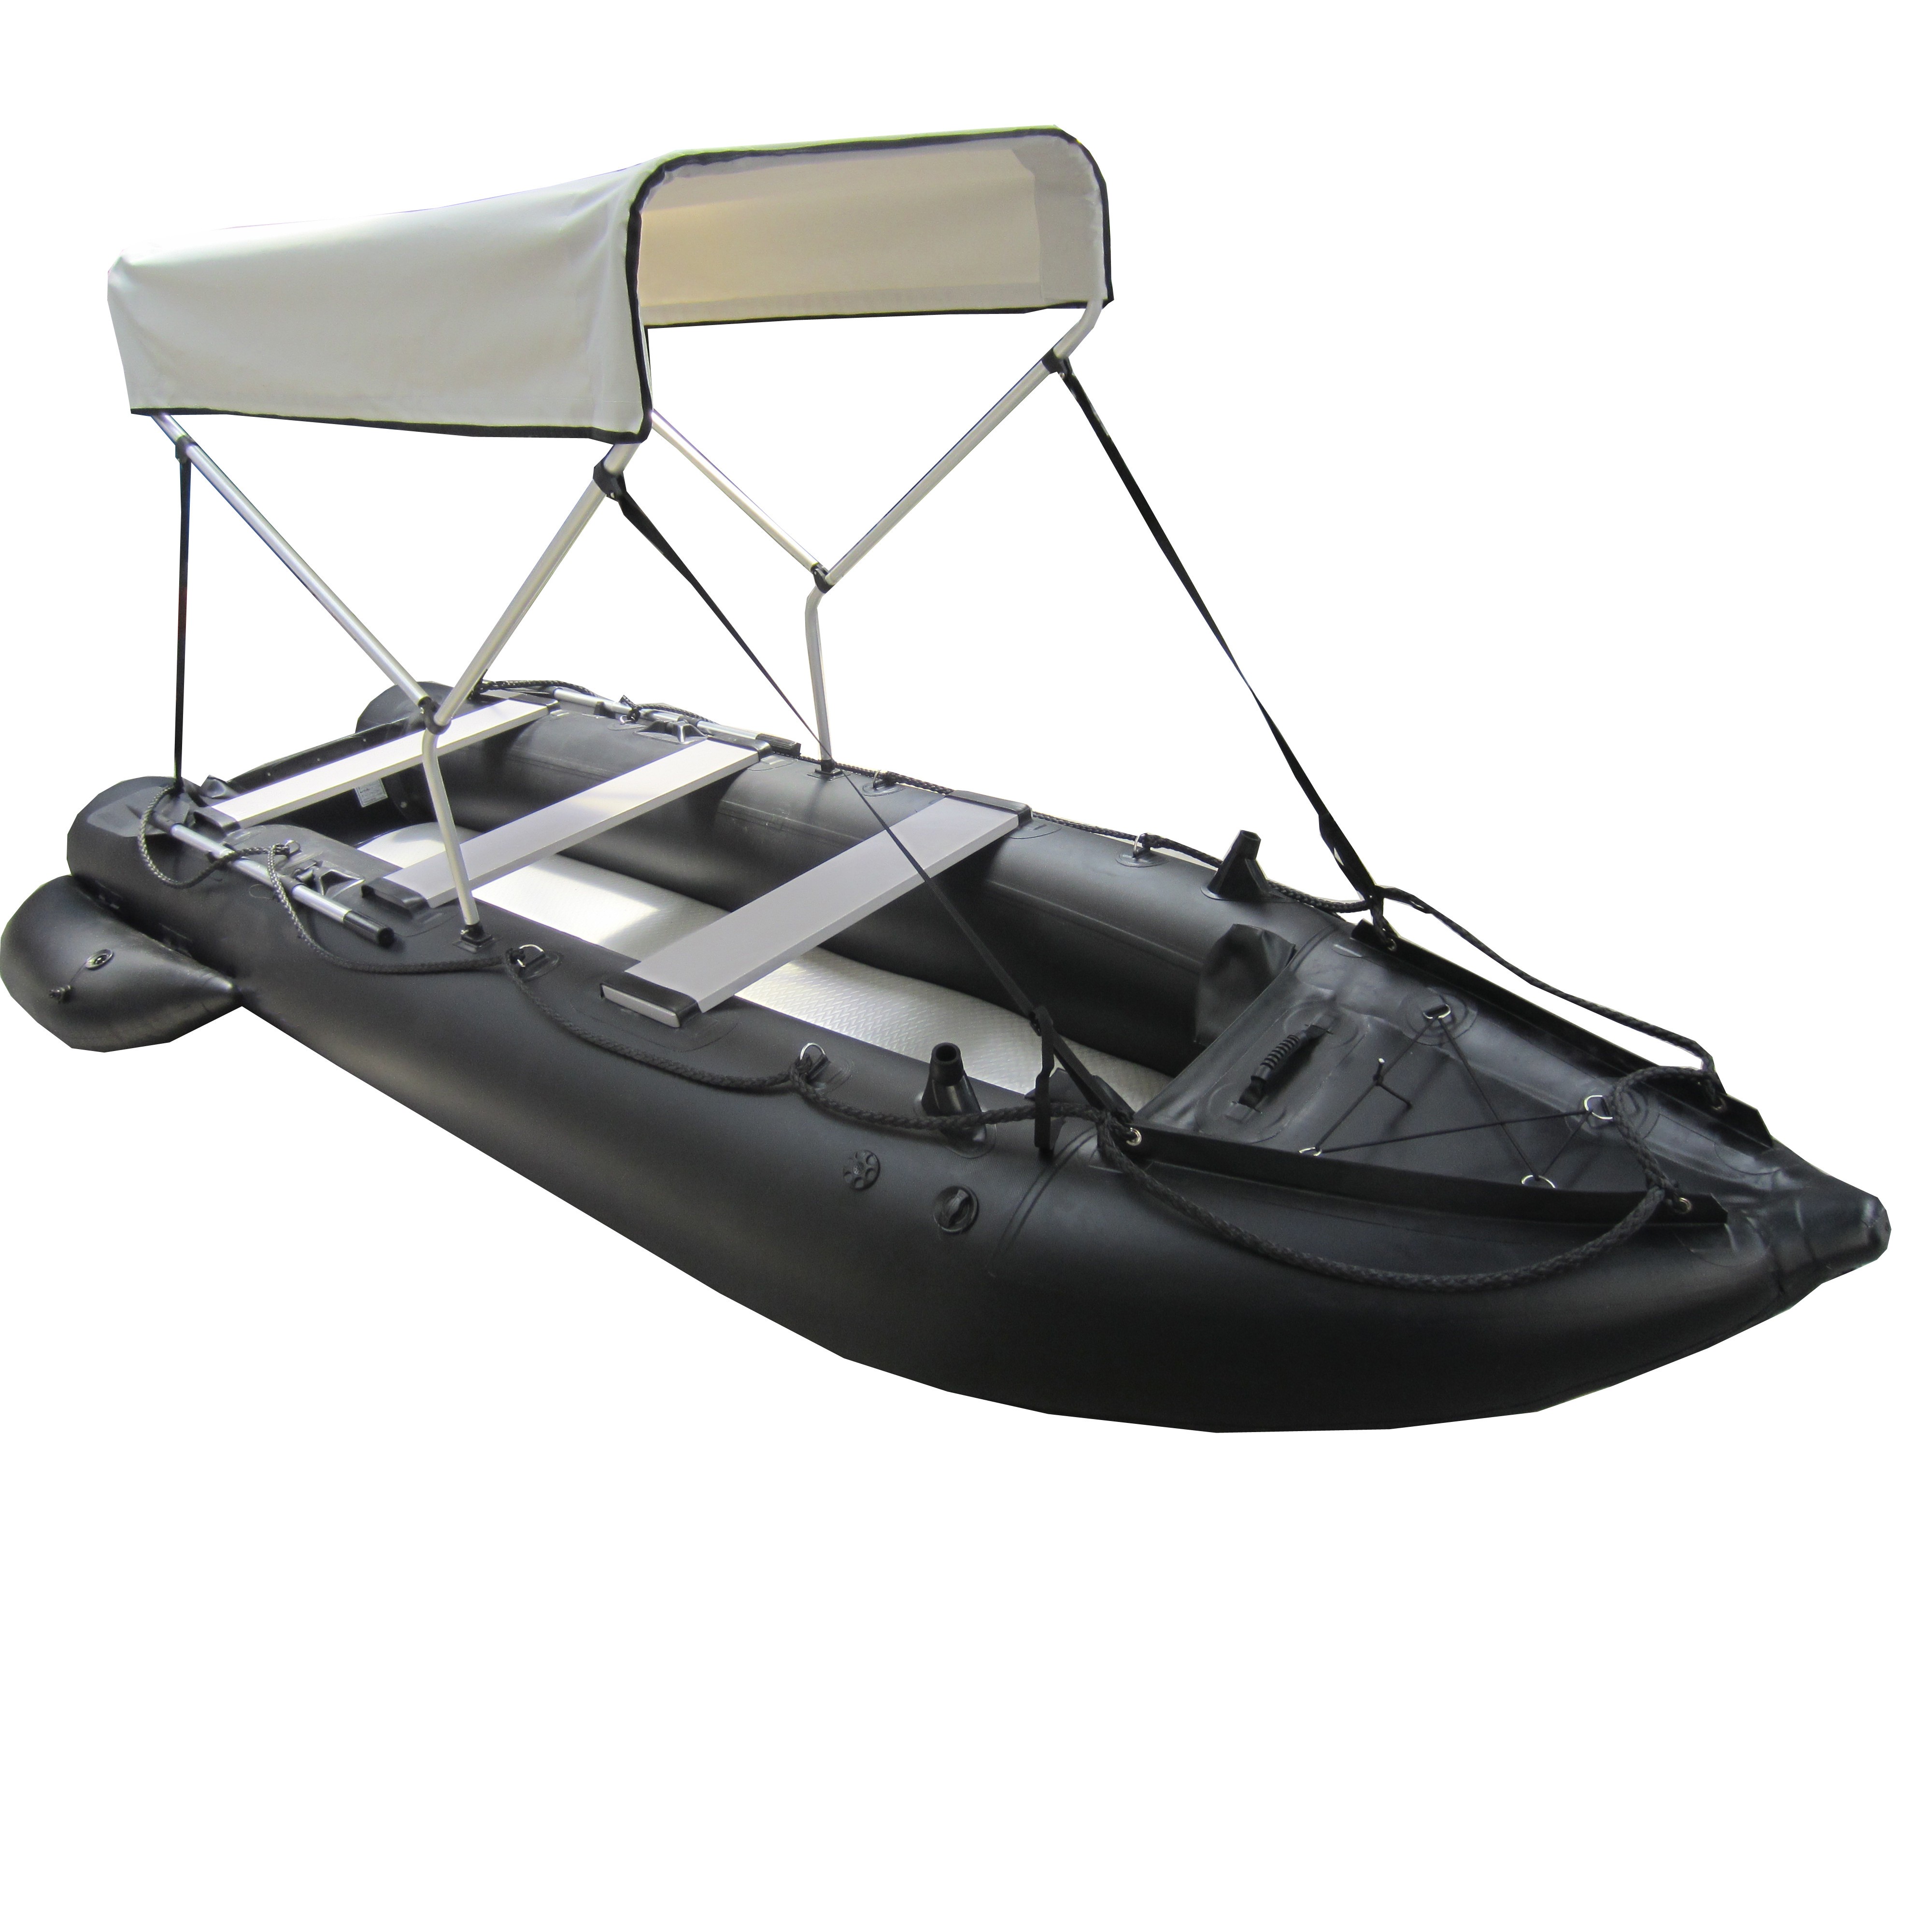 Inflatable river kayak 2 person with customized color